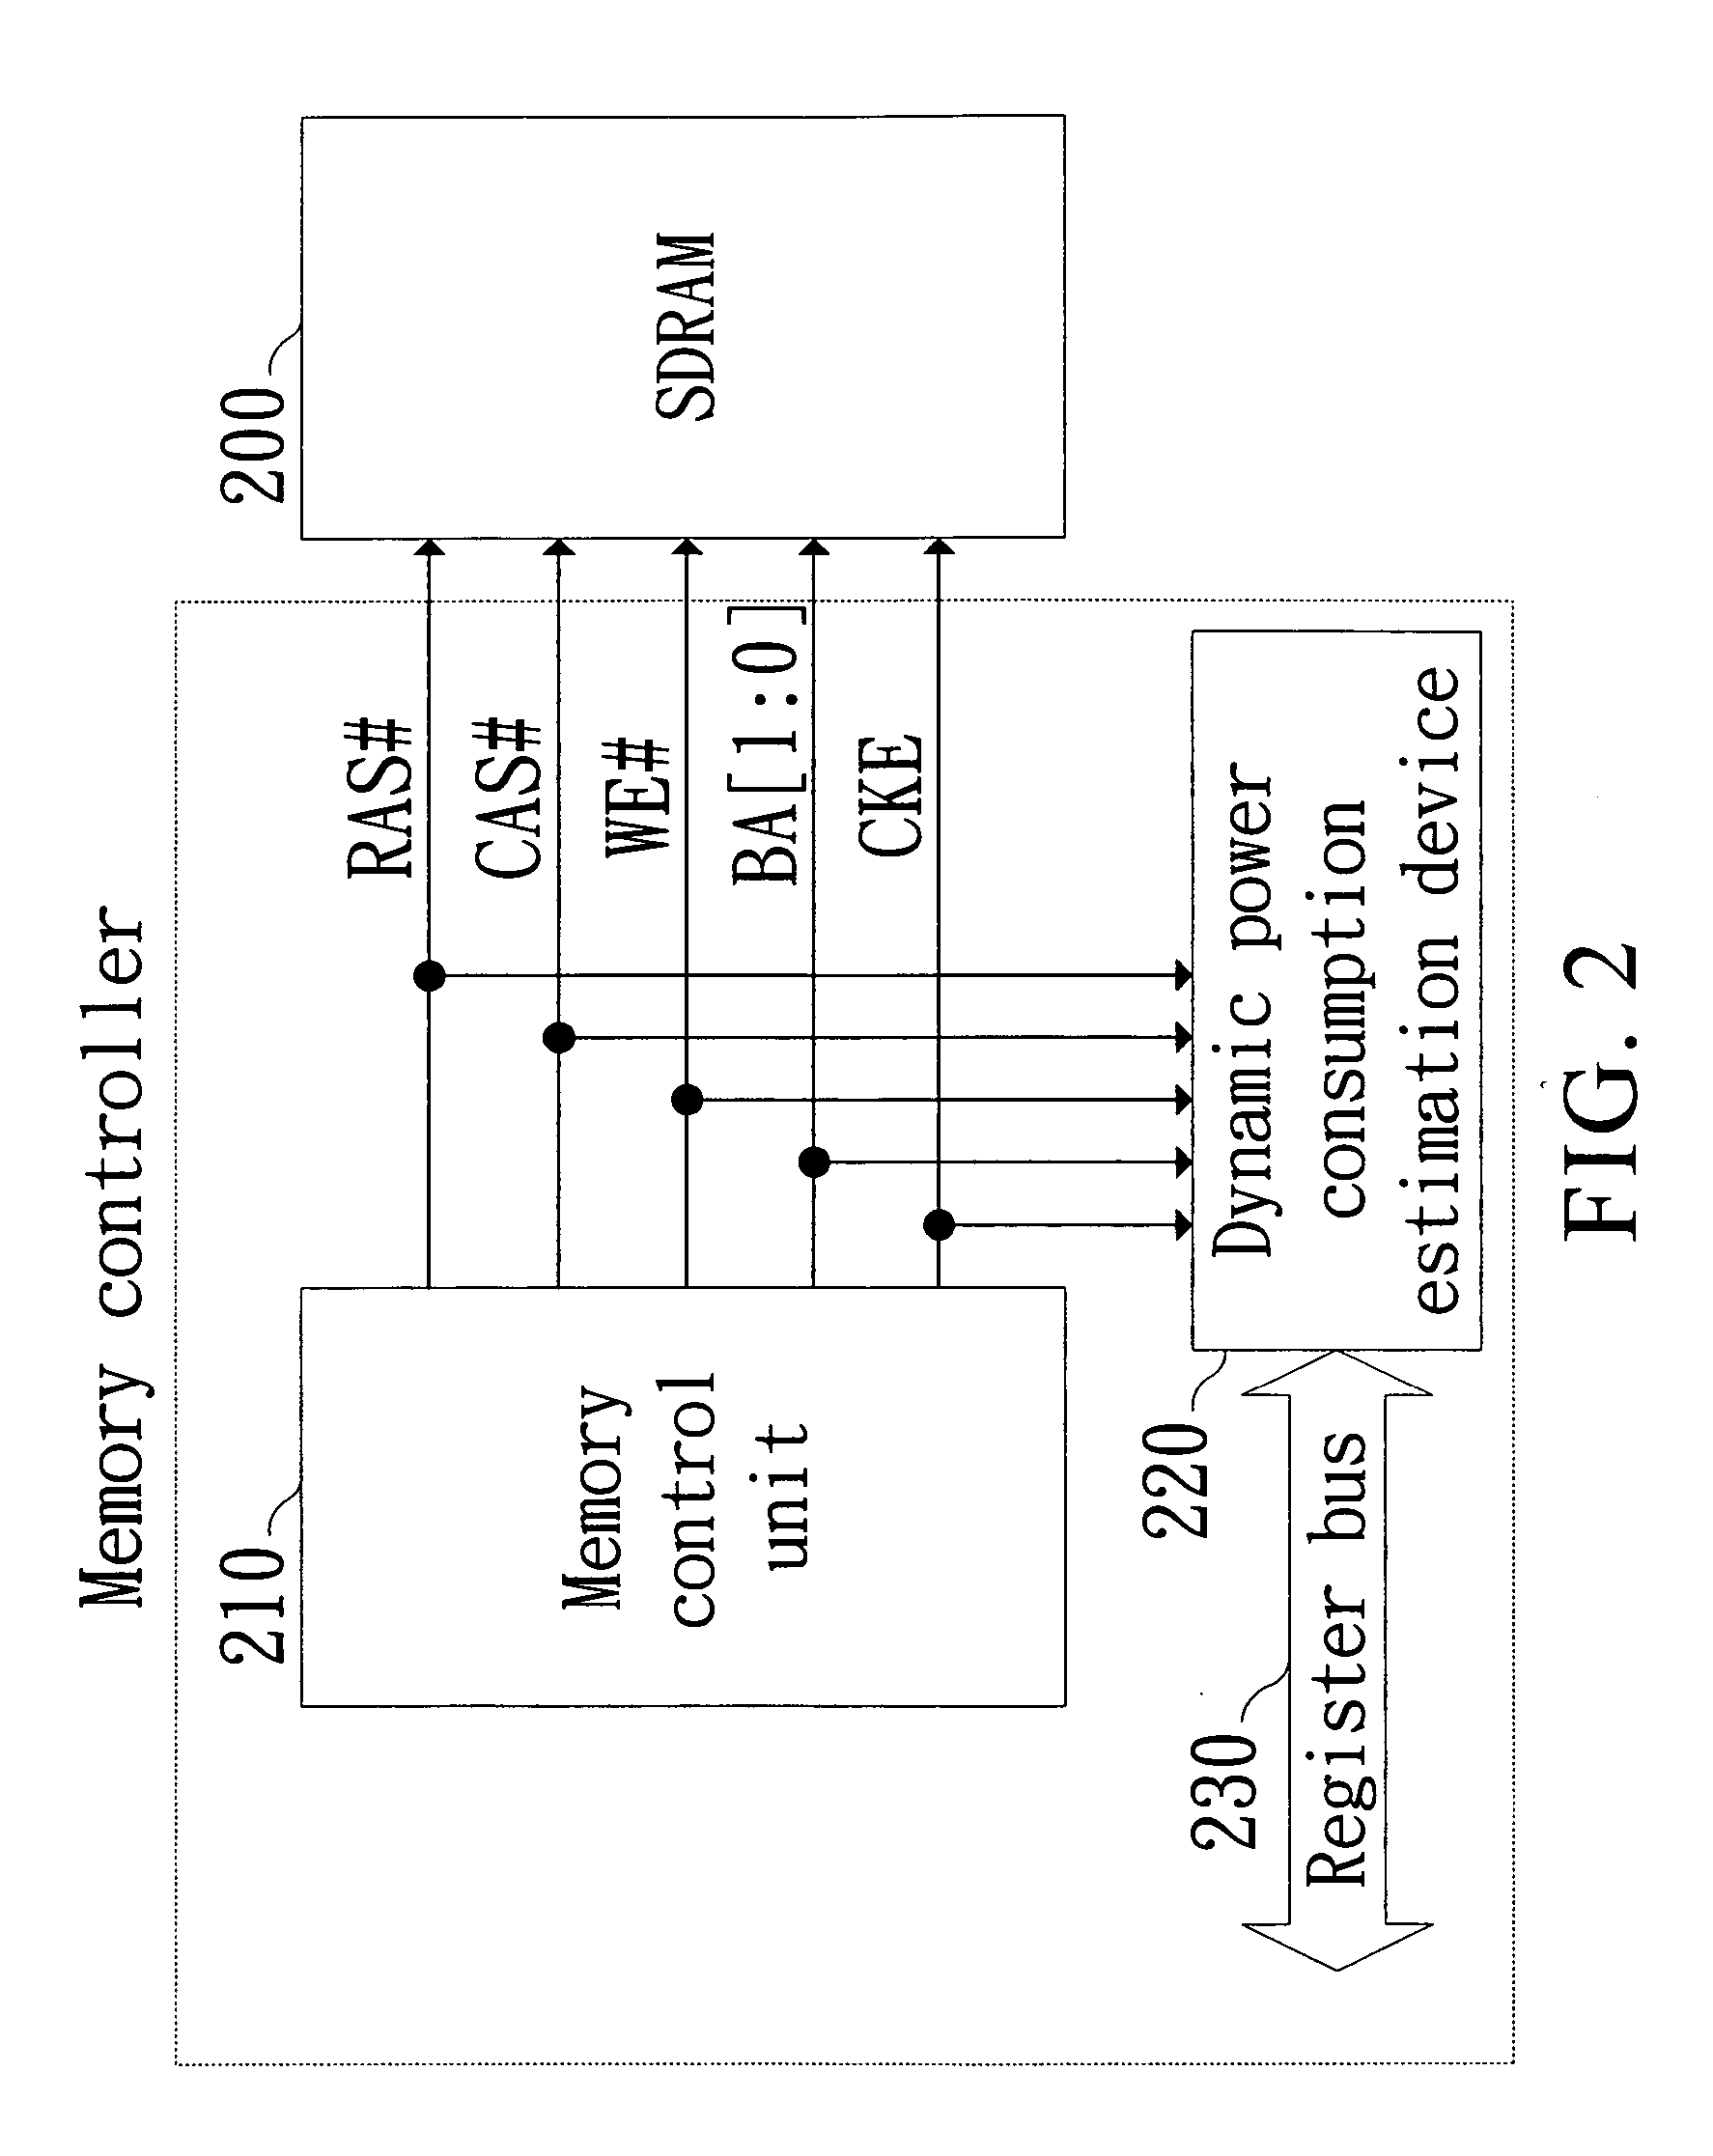 Memory controller capable of estimating memory power consumption